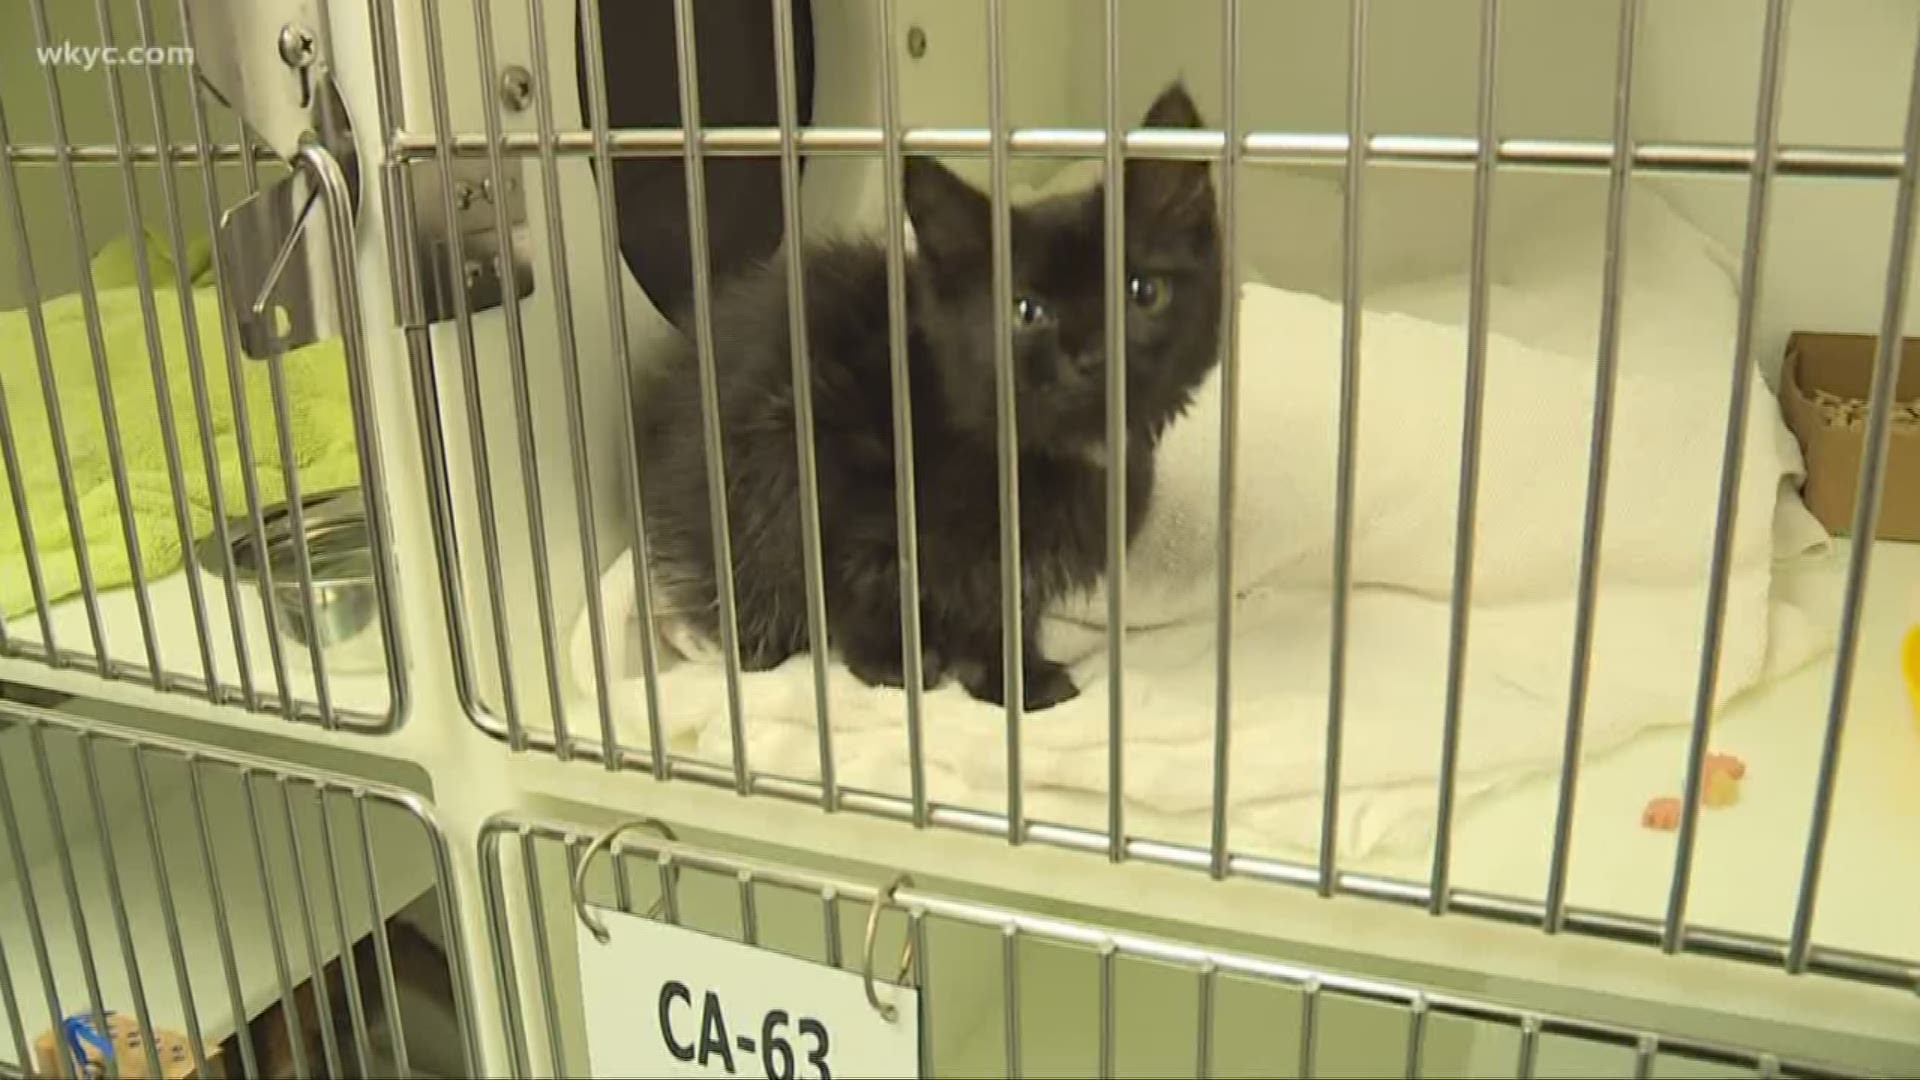 WKYC volunteers to 'Clear the Shelters'